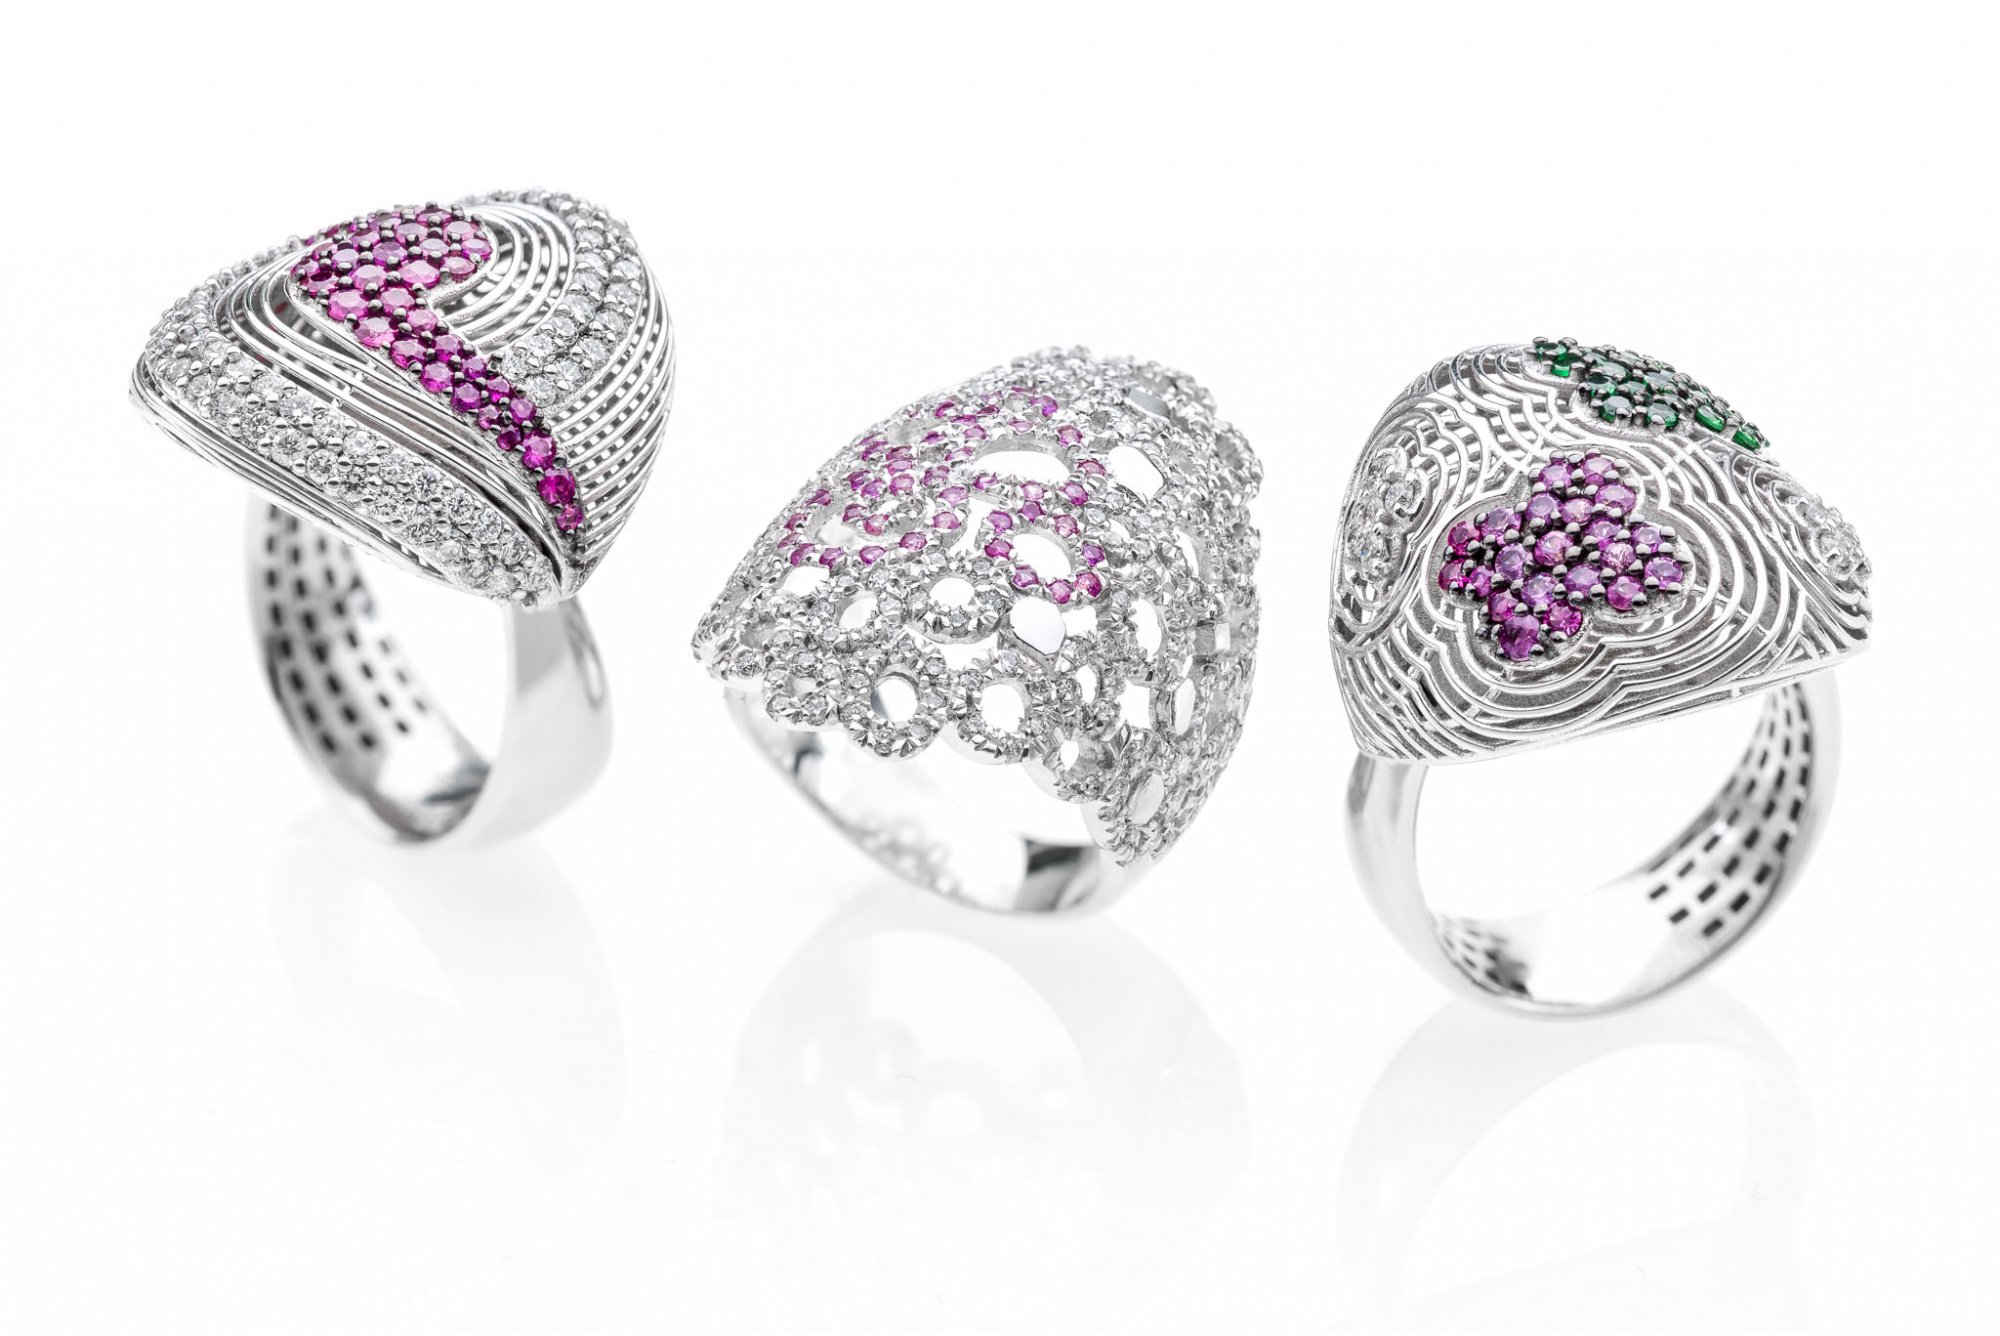 18 KT white gold rings with ruby,emerald and round brilliant cut diamonds